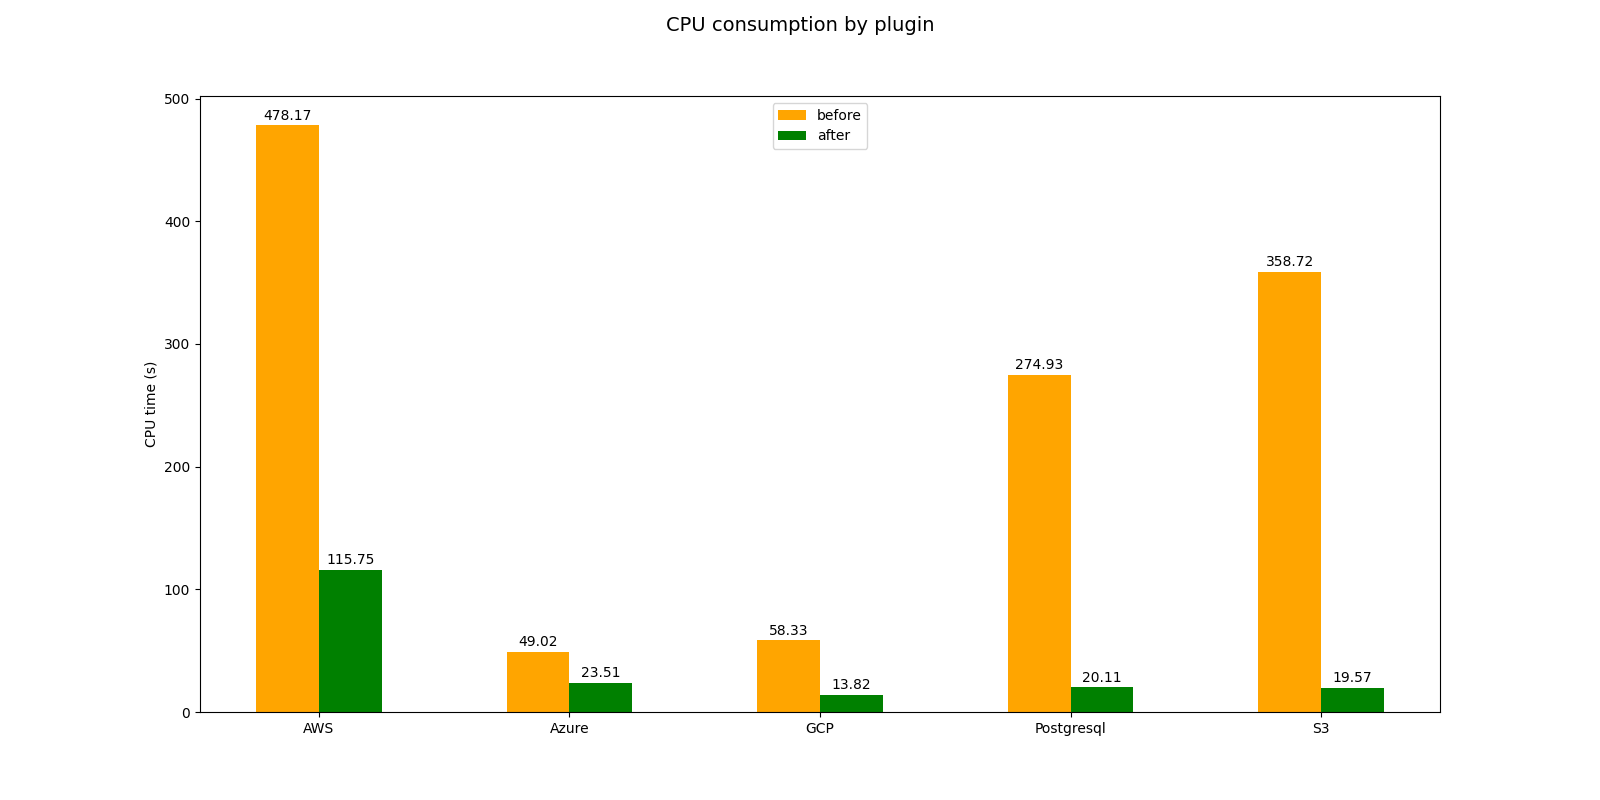 Bar chart comparing CPU consumption by plugin for AWS, Azure, GCP, PostgreSQL, and S3 before and after a specific update. Each plugin shows a significant reduction in CPU time in the 'after' version.